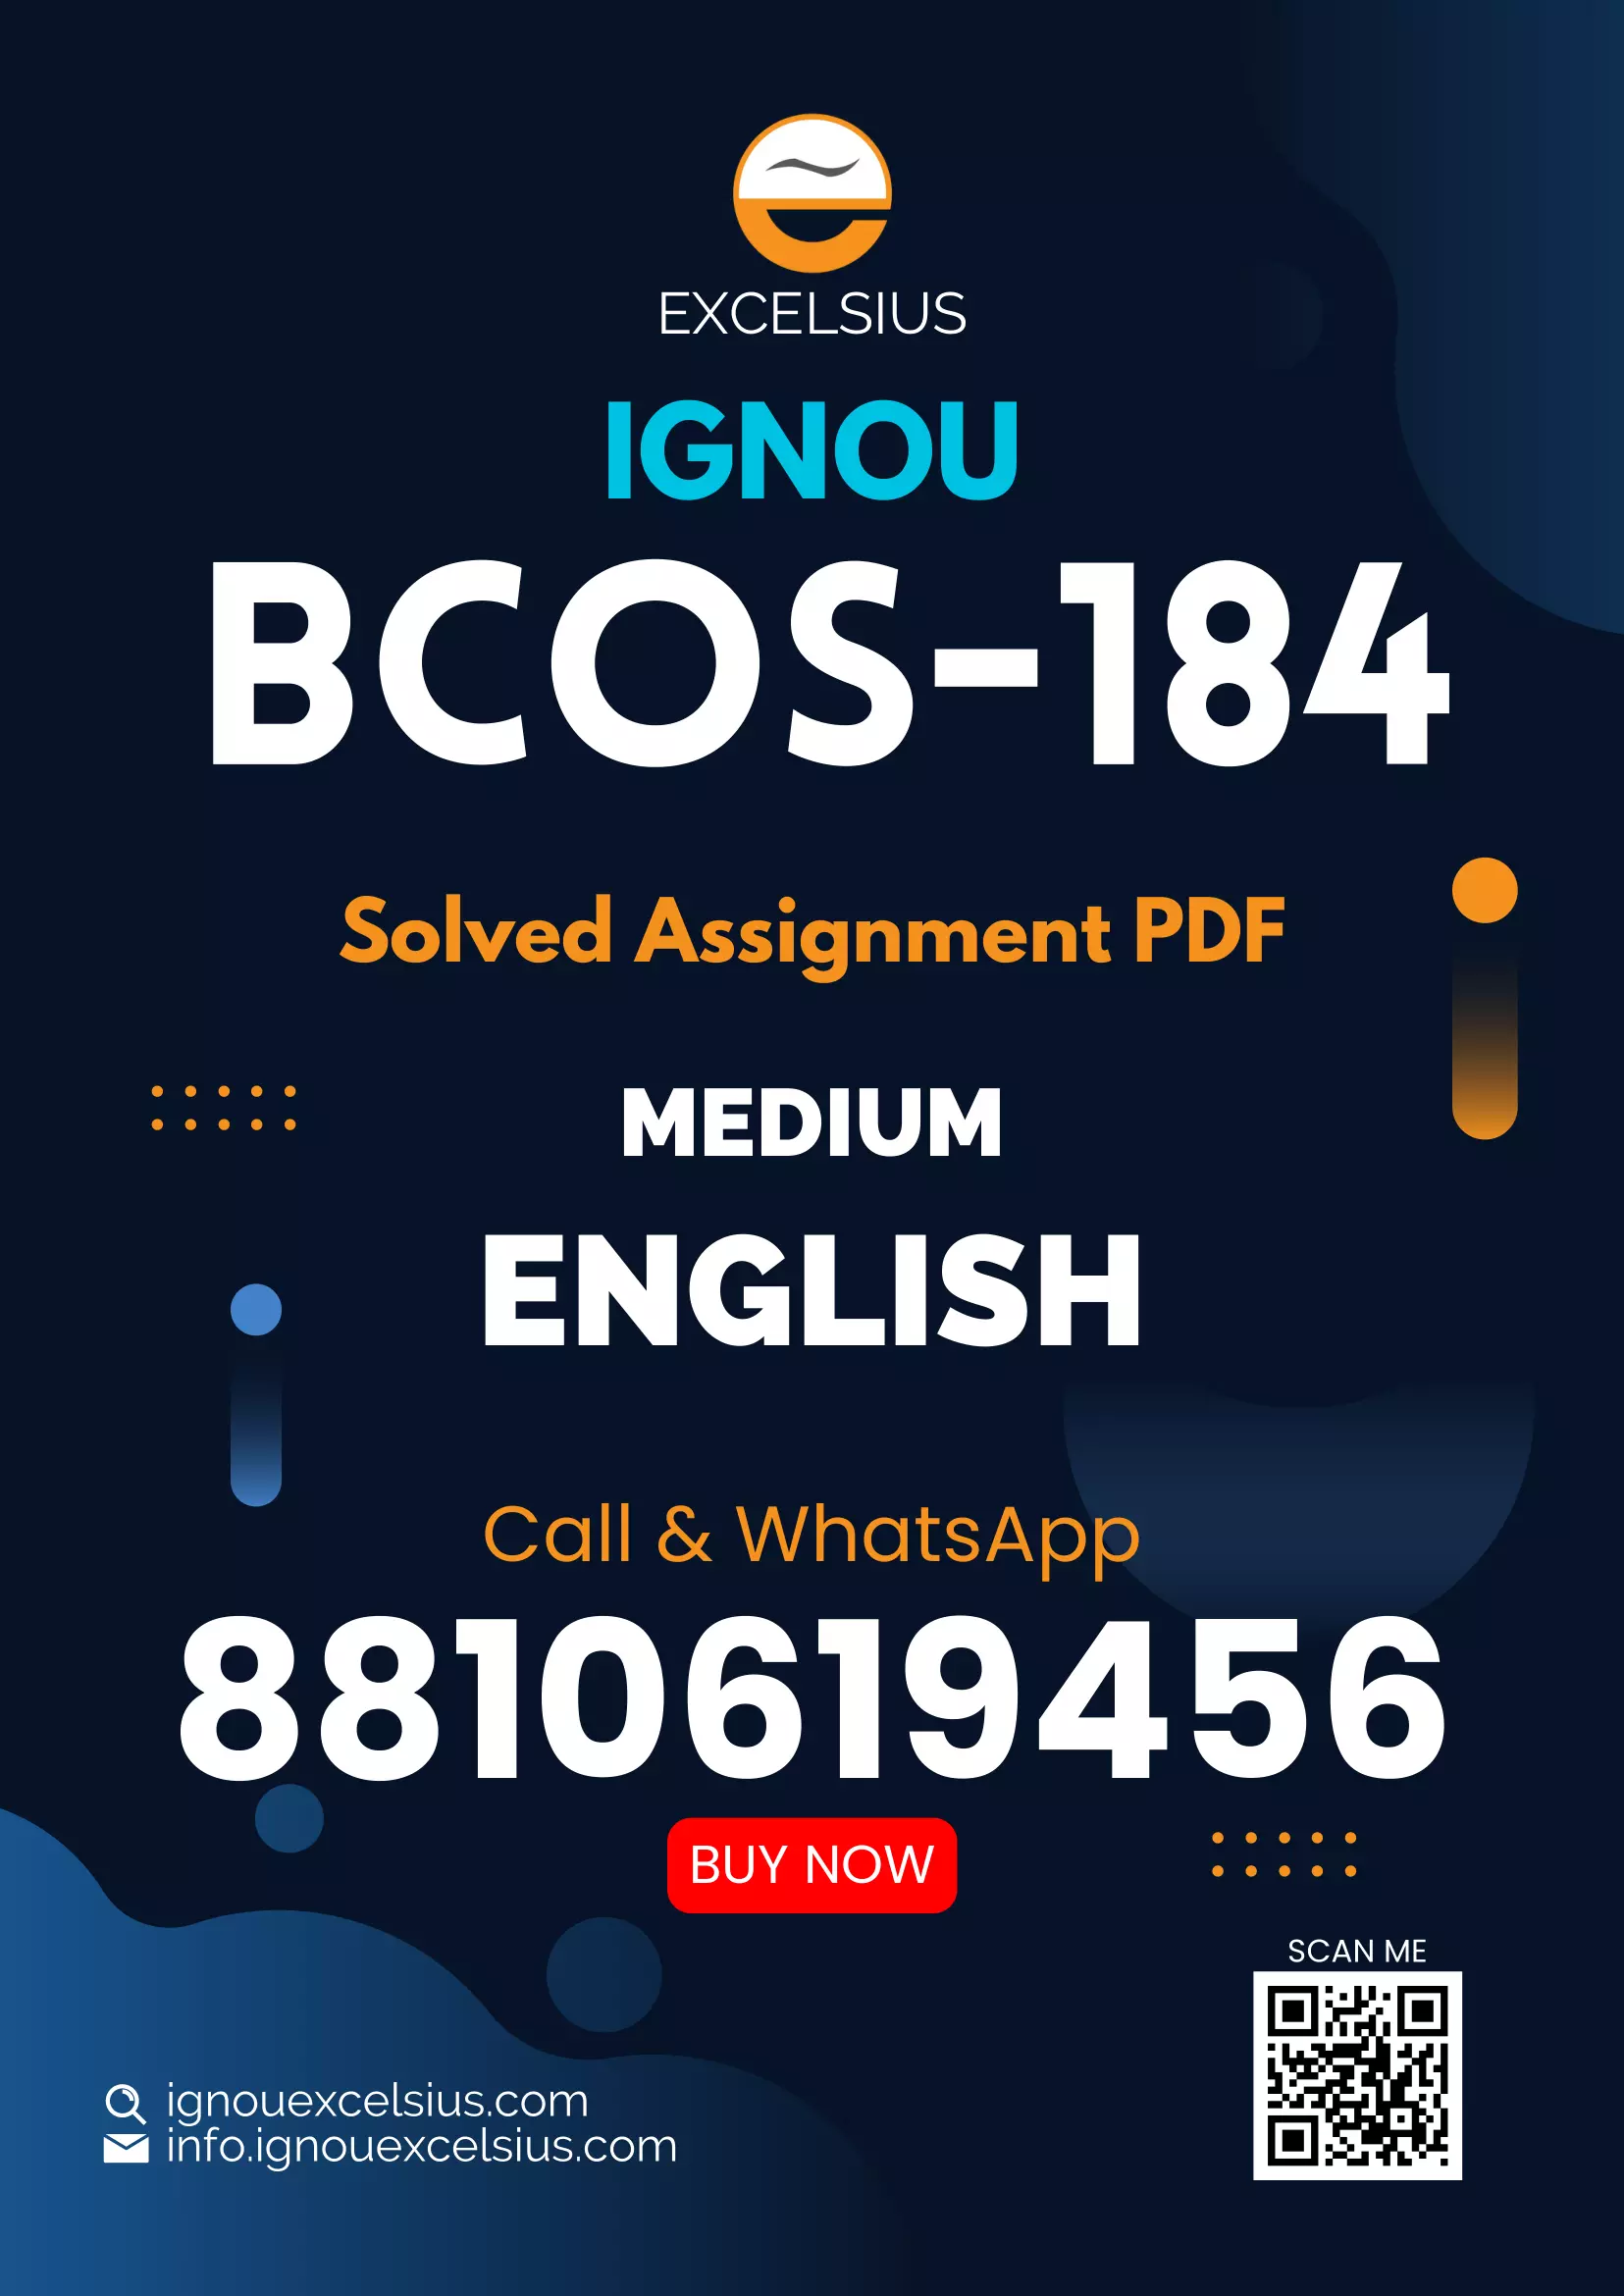 IGNOU BCOS-184 - E-Commerce, Latest Solved Assignment-January 2023 - December 2023